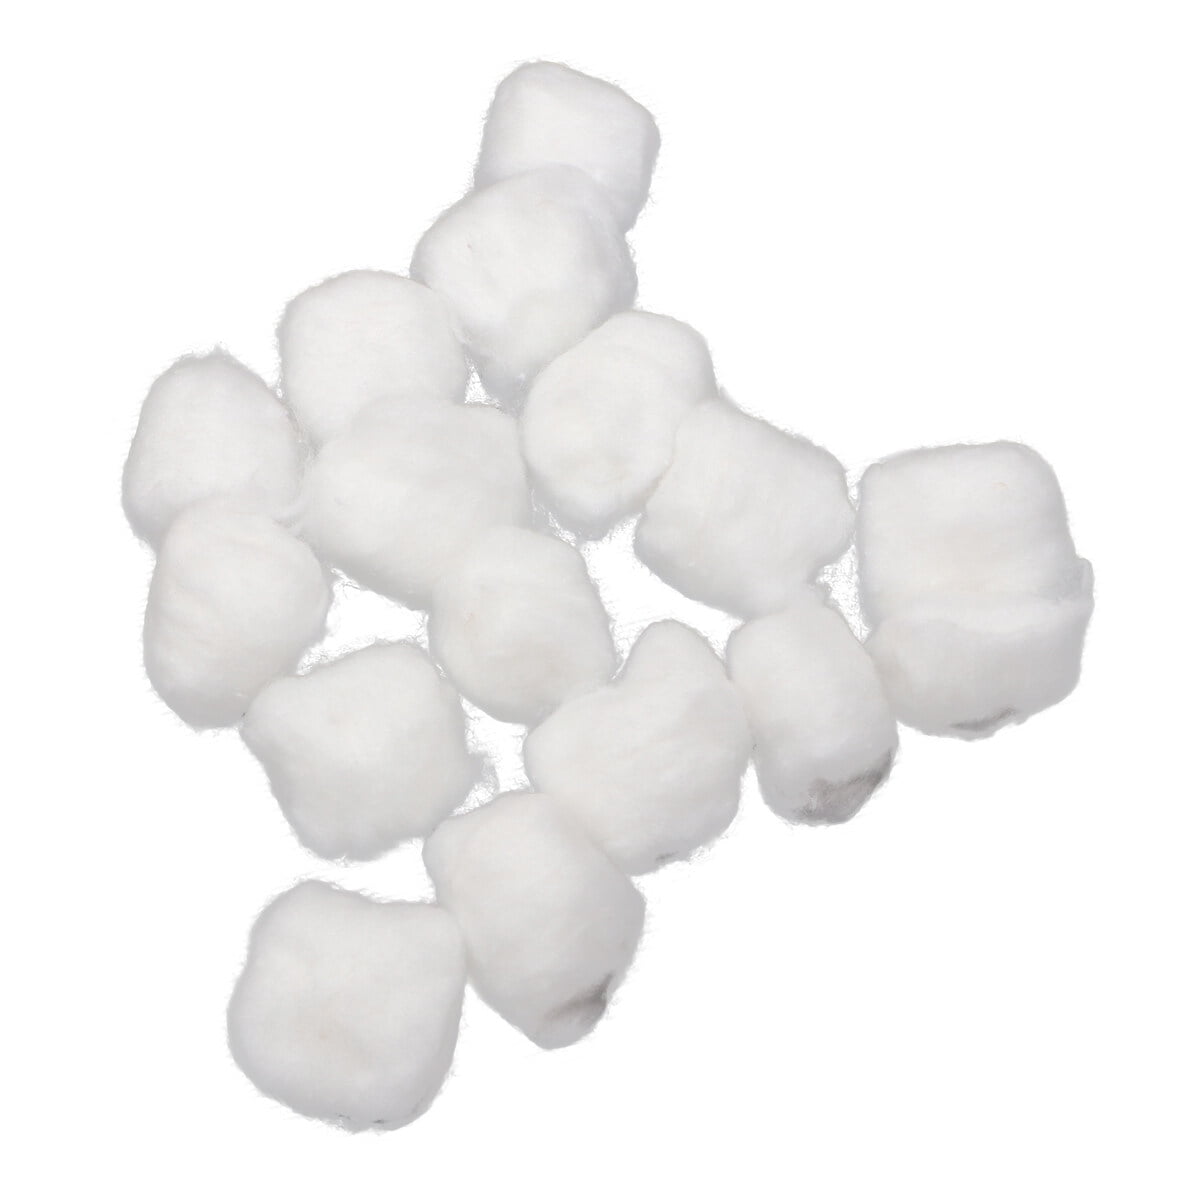 5 Packs of Pure Cotton Ball Makeup Remover Cotton Ball Face